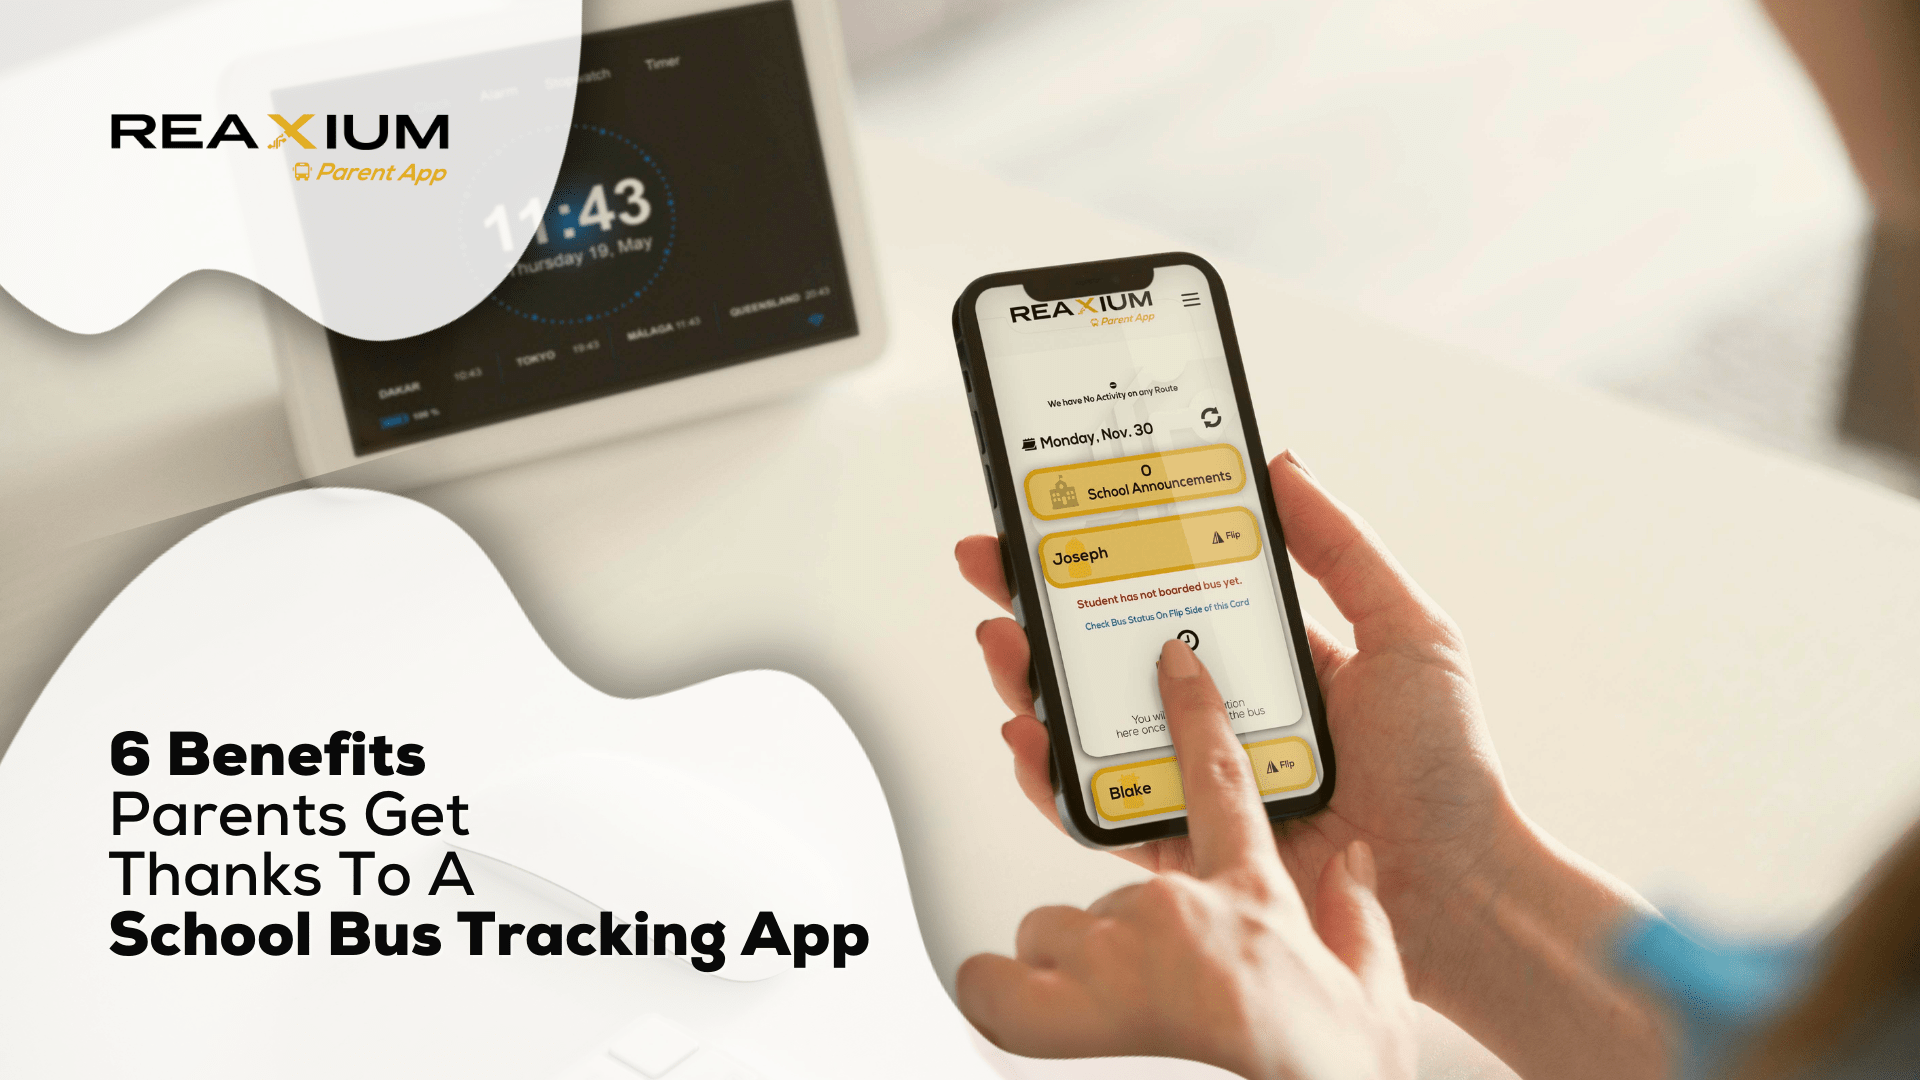 School Bus tracking app and parent's finger